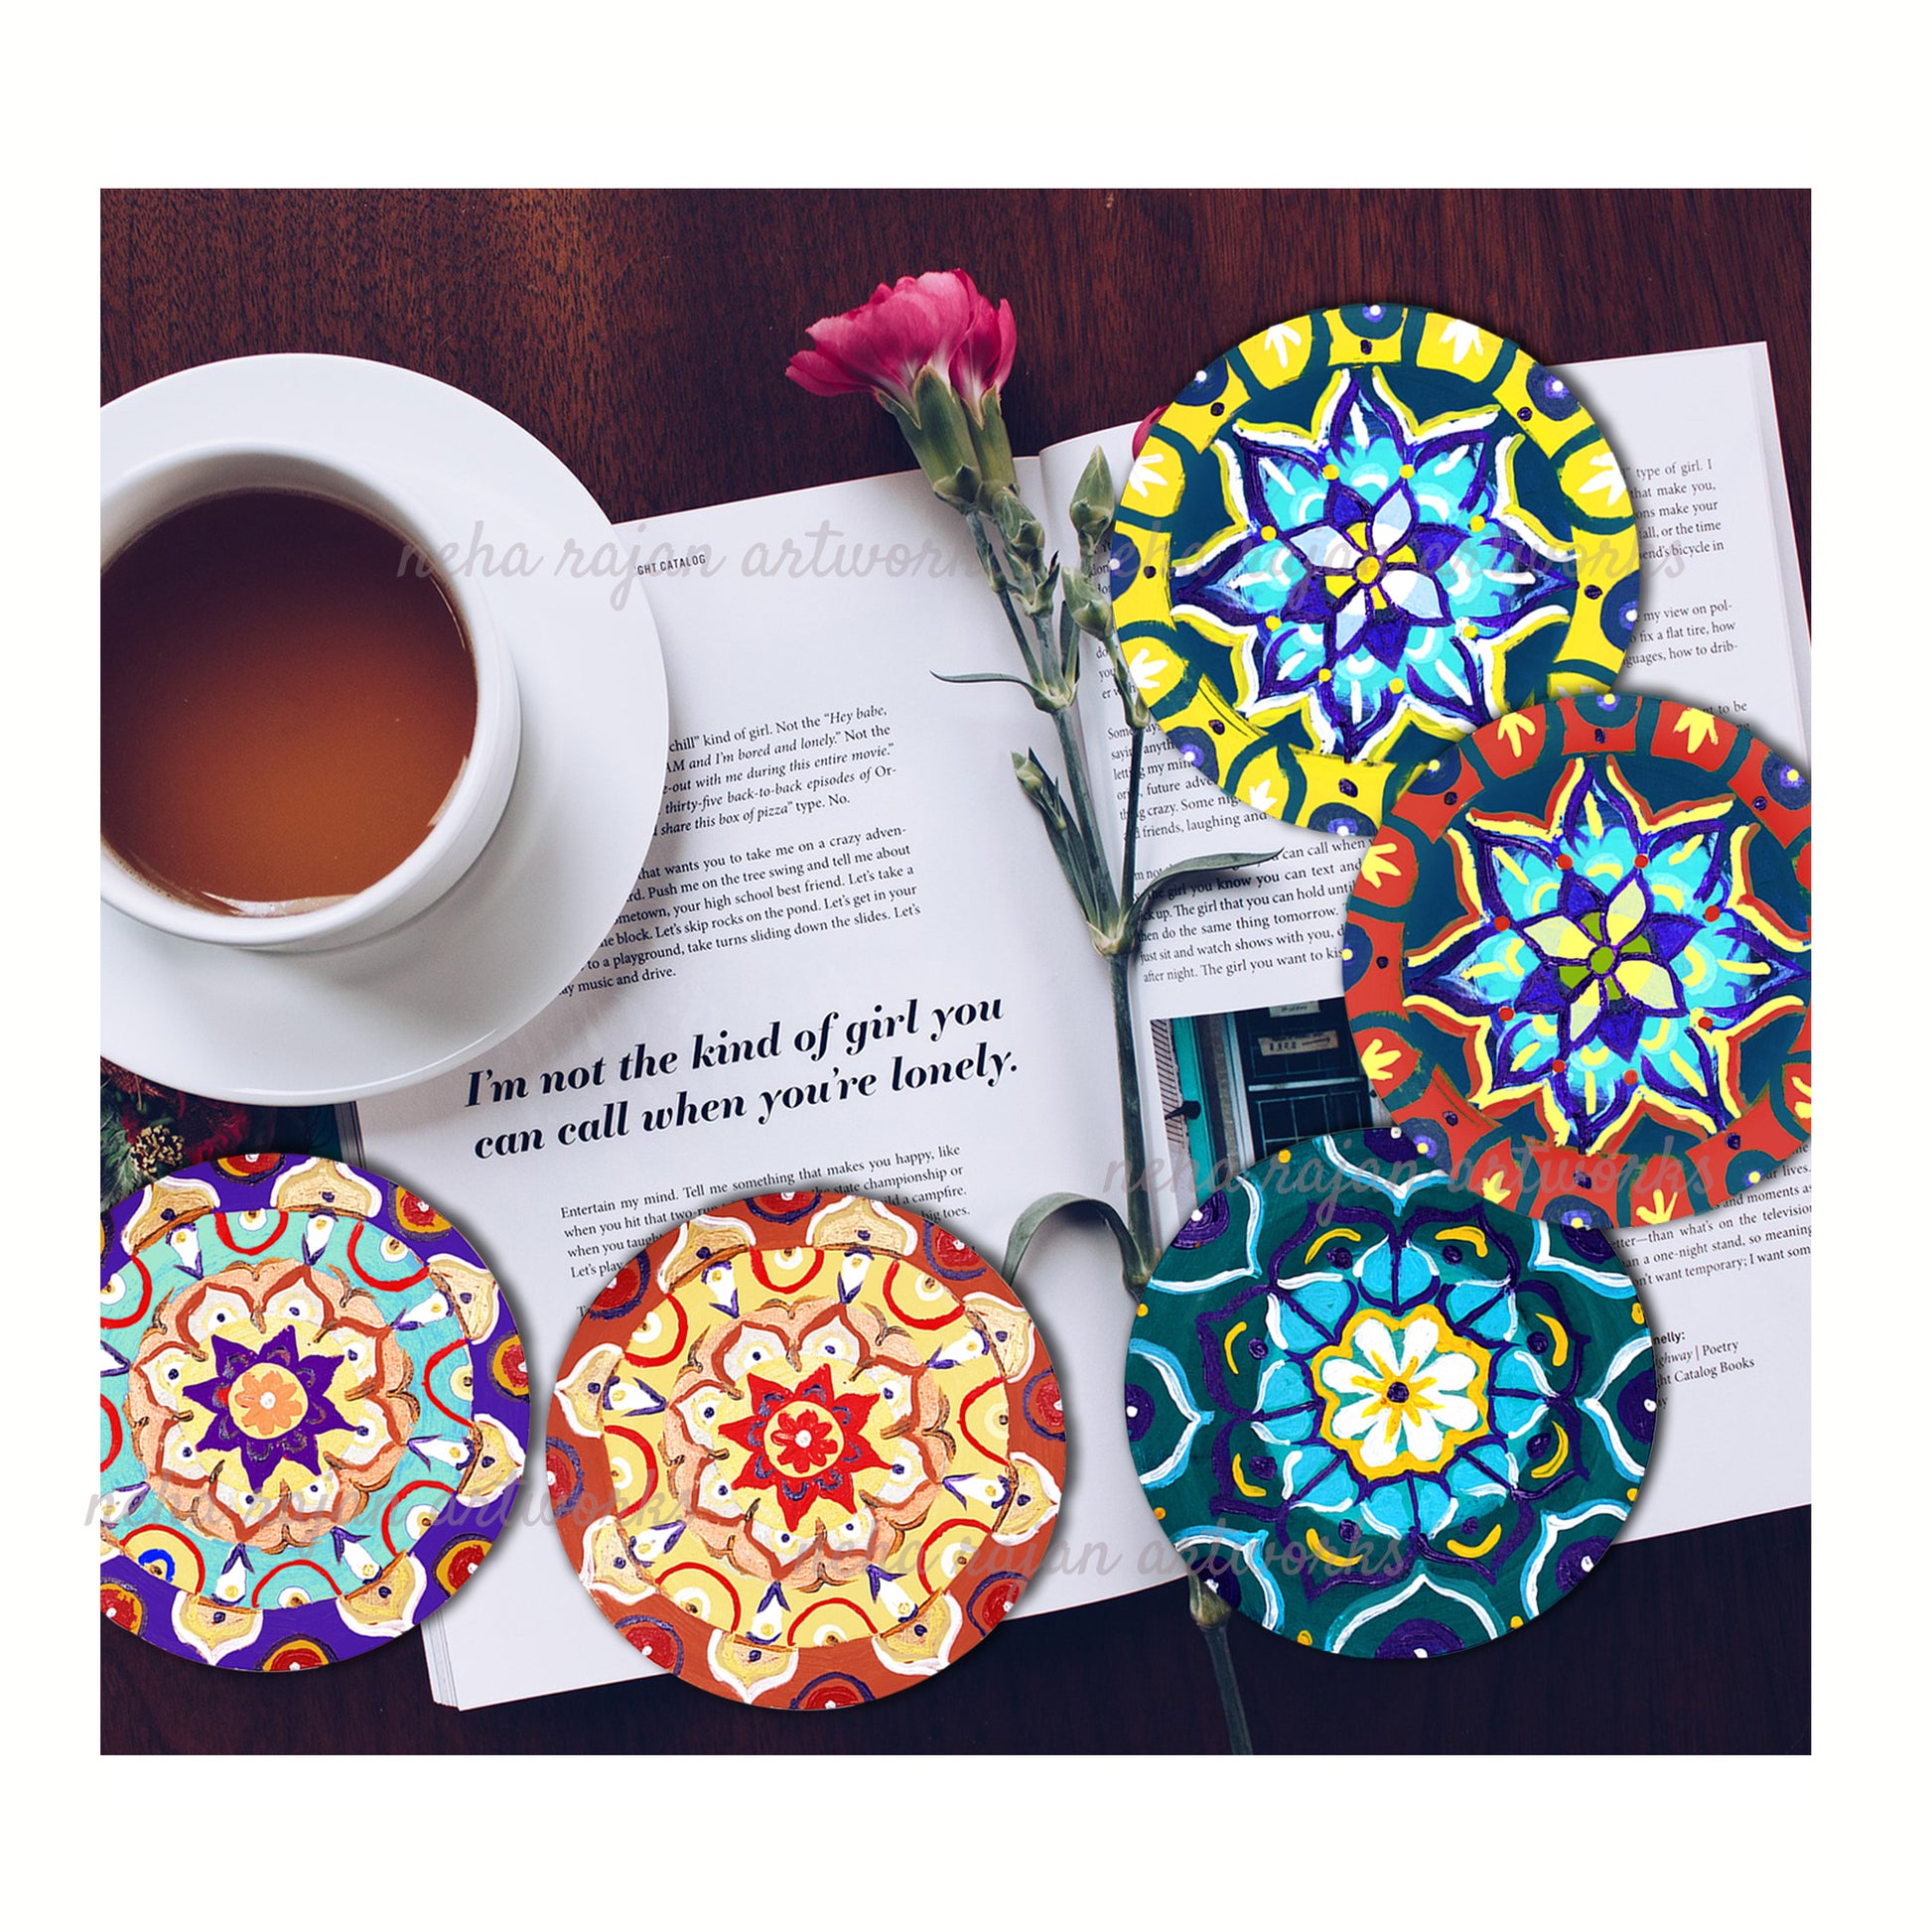 Neha Rajan Artworks Original Wooden Round Coffee/ Tea Coasters Set- Handcrafted & Hand-Painted Floral Mandala Coaster with Easel for Kitchen/Table & Home Decor/Gifts/Restaurants/Living Room/Coffee Table (Set of 2)